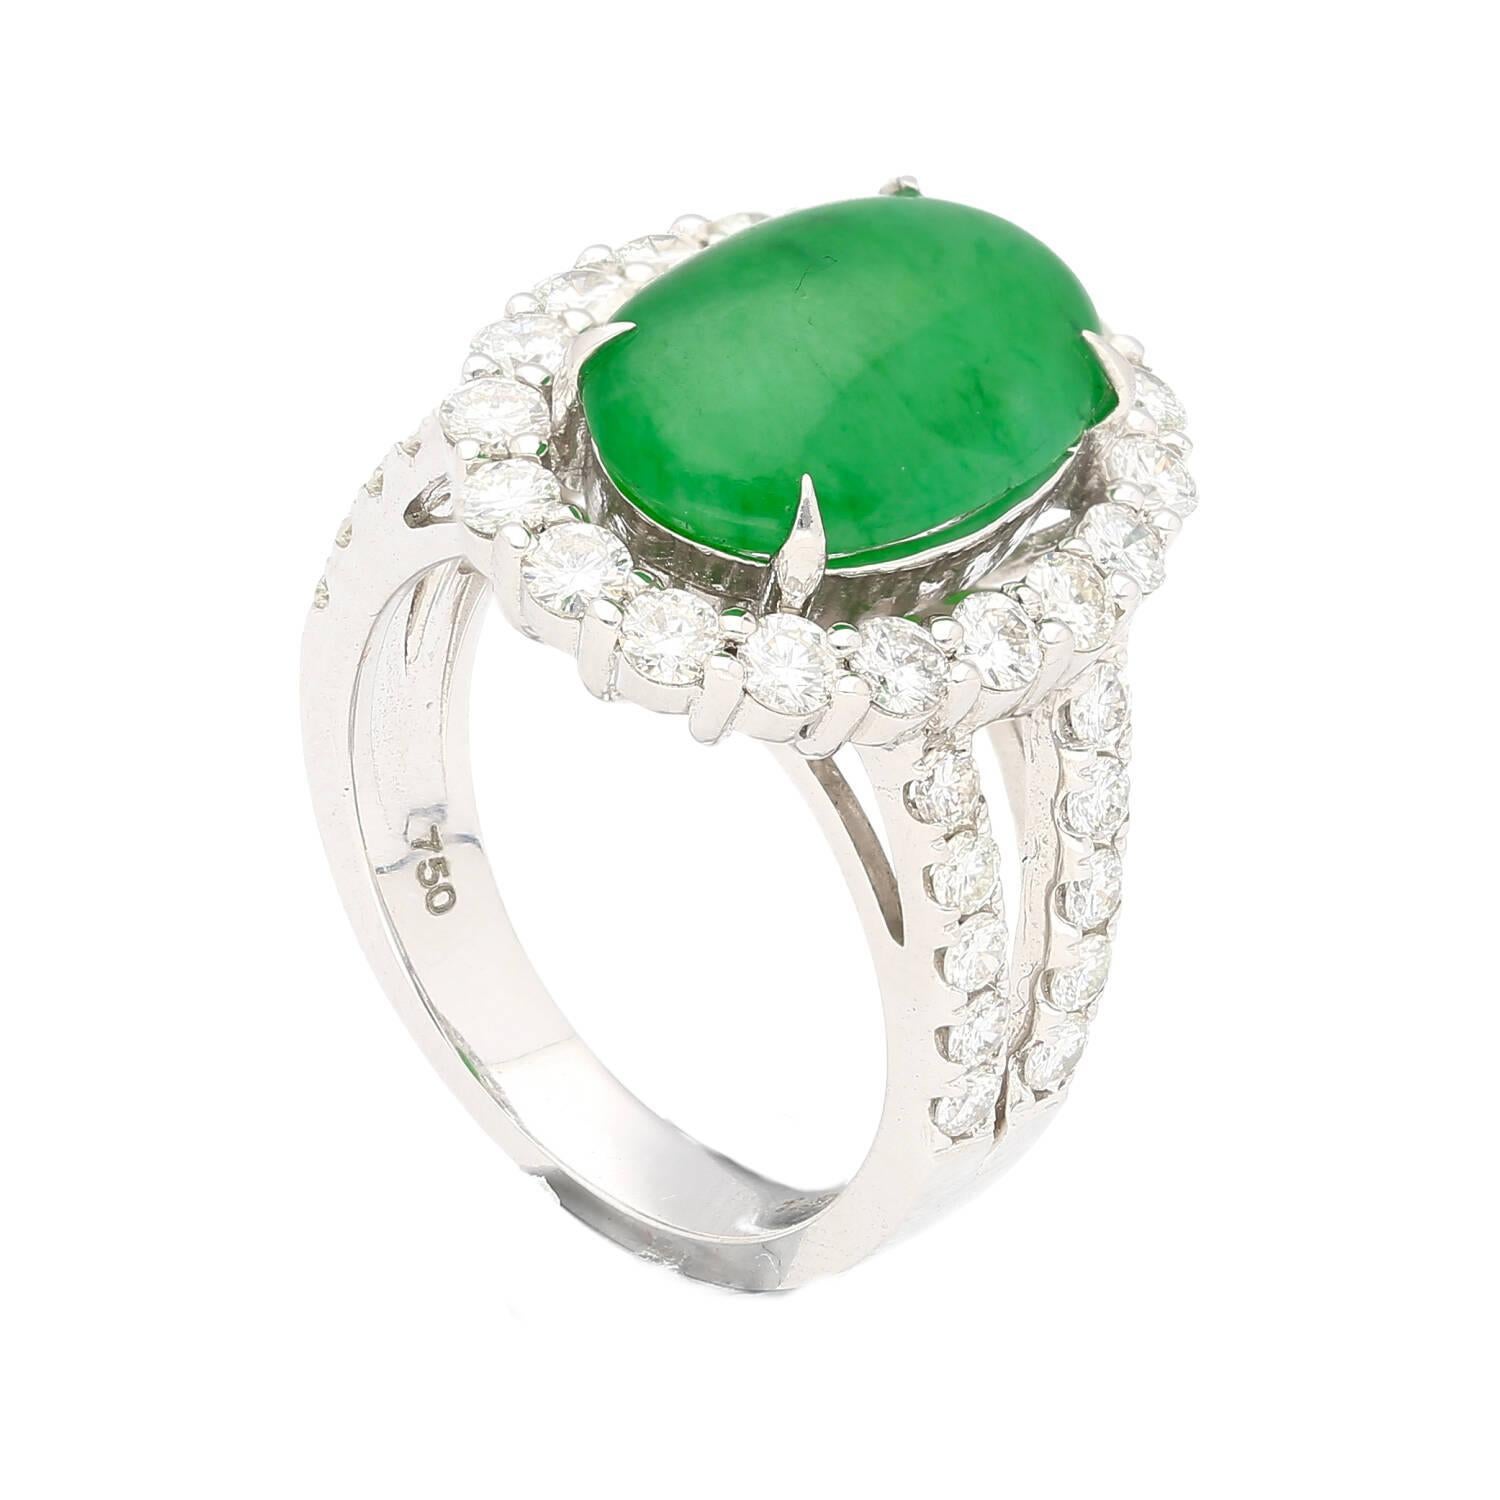 Women's HK Lab Certified 5.329 Carat Jade and Diamond Halo Ring in 18K White Gold For Sale